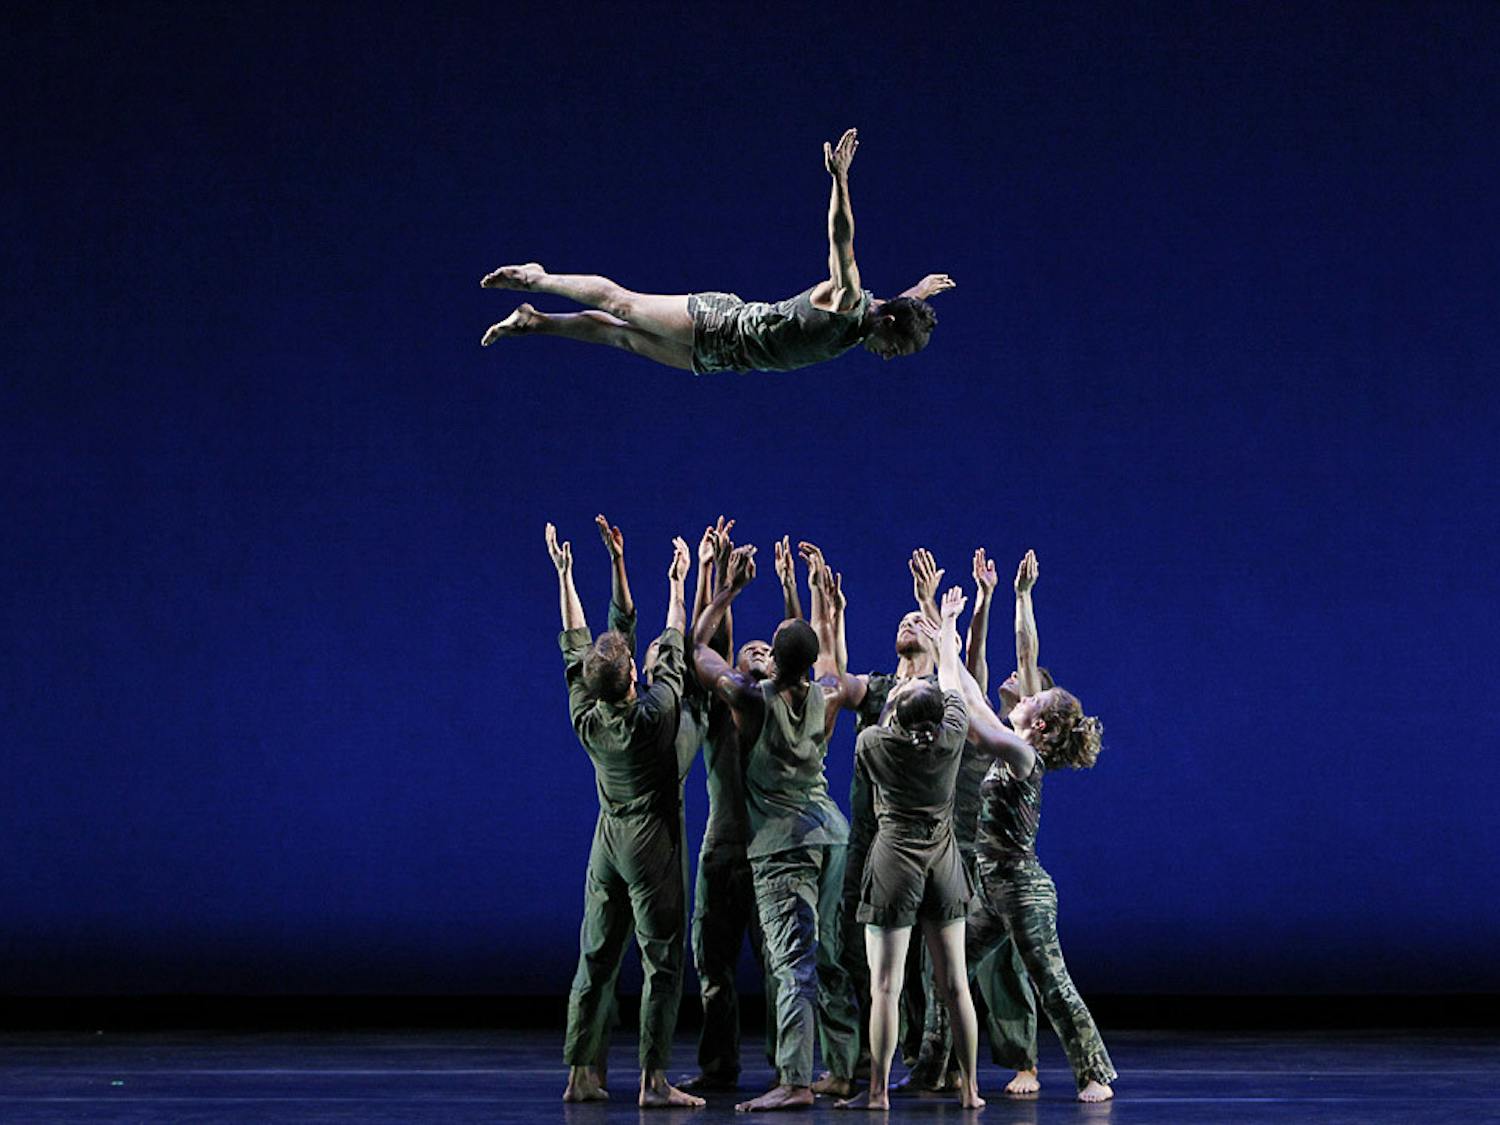 Members of the Bill T. Jones/Arnie Zane Company prepare to catch one of its dancers during the performance of Jones' "D-Man in the Waters." The dance group is working with the USC Dance Company to put together a show titled "Story/Time" that will debut at the Koger Center on April 1 and 2, 2023.